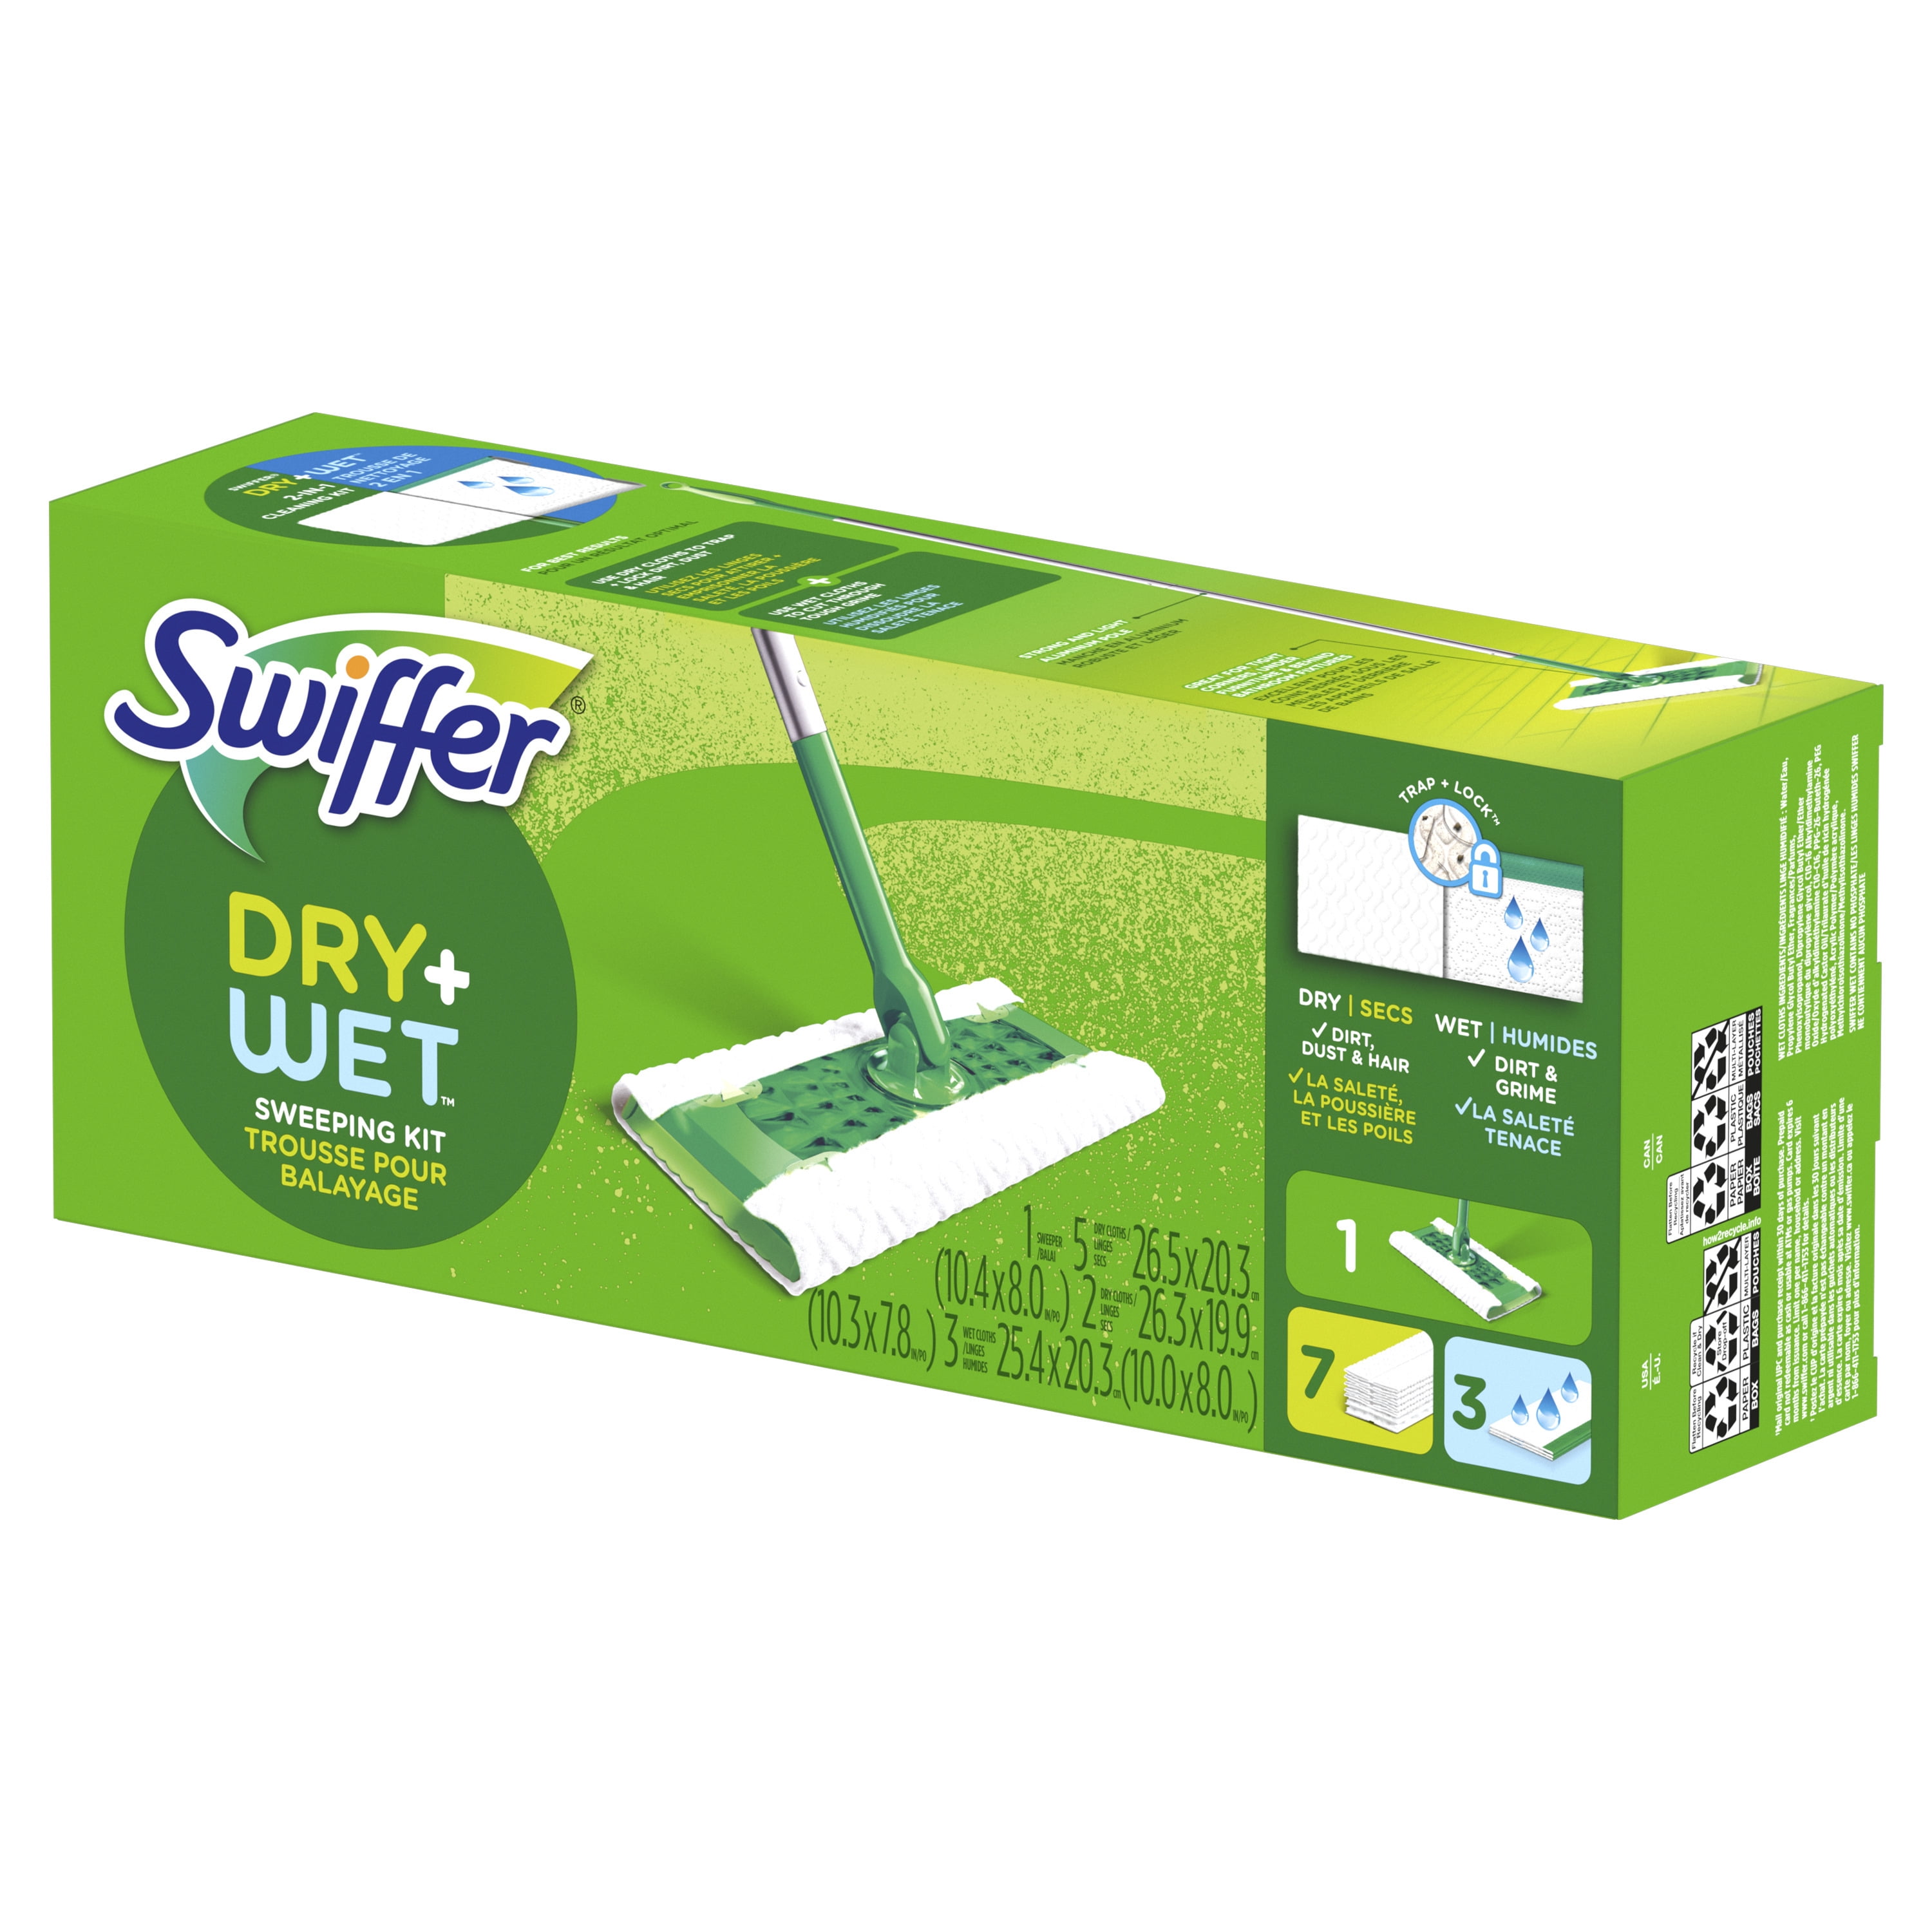 Swiffer Sweeper Dry + Wet Multi Sweeping Kit (1 Sweeper, 7 Dry Cloths, 3  Wet Cloths) 